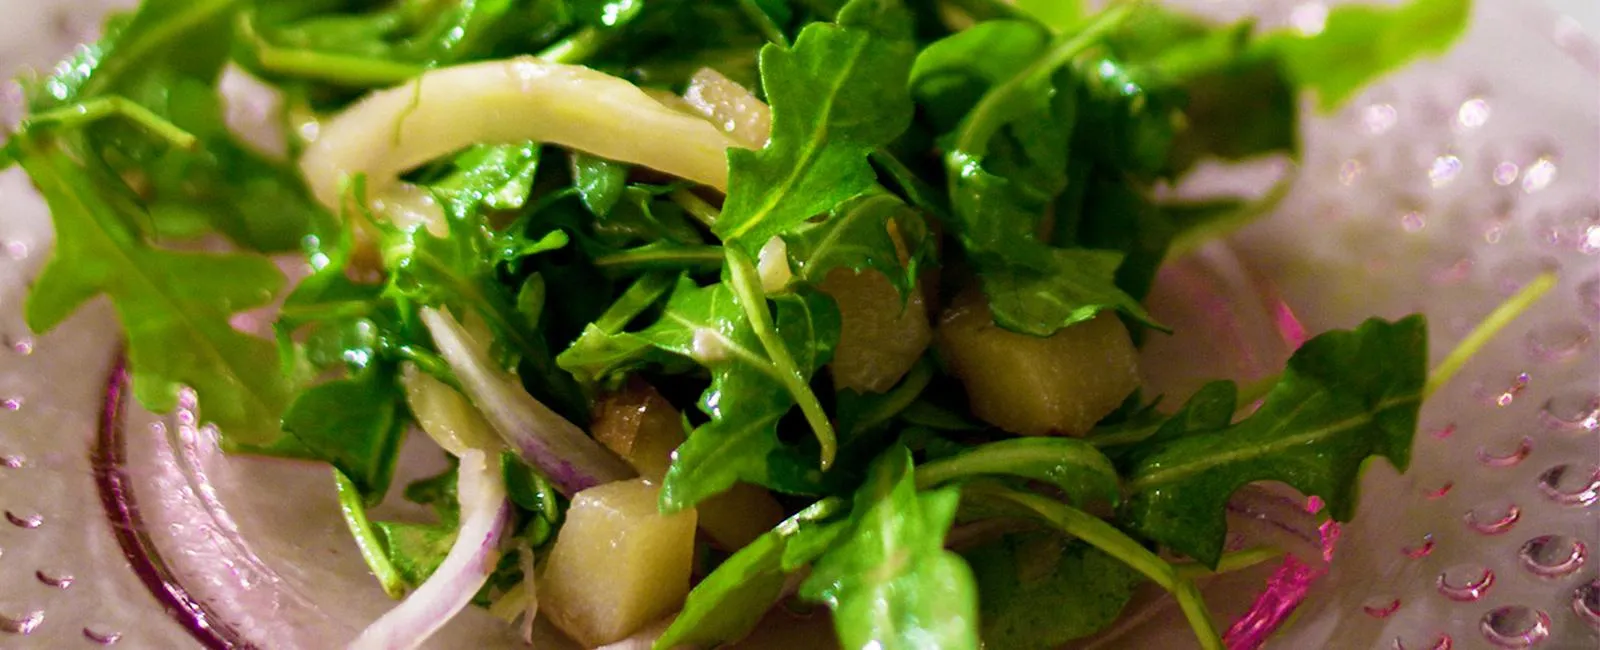 Roasted Fennel, Pear and Arugula Salad with Balsamic-Grape Dressing